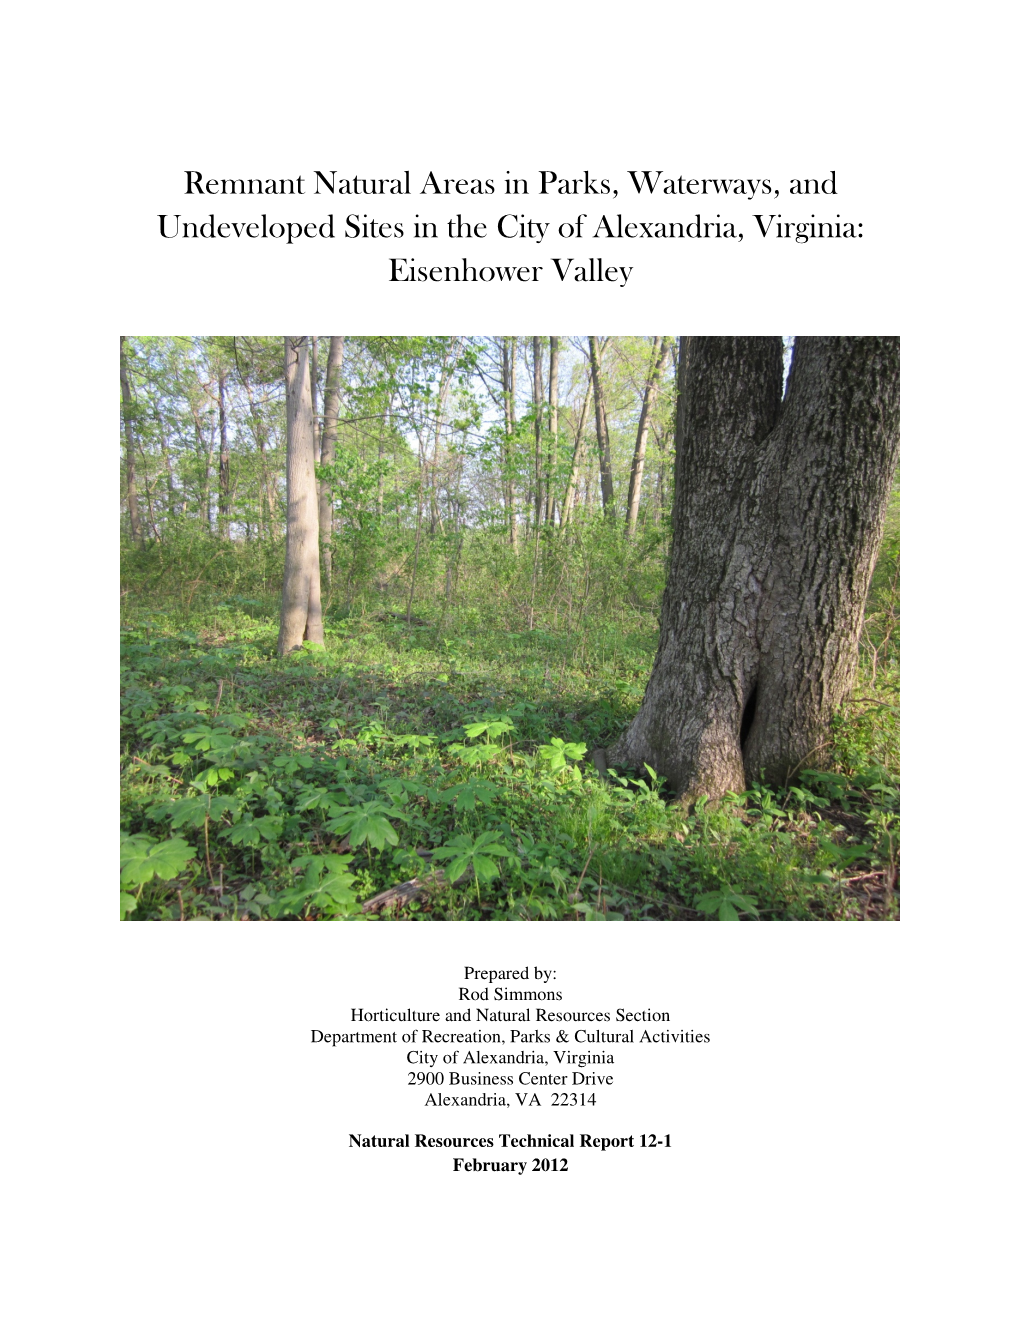 Remnant Natural Areas in Parks, Waterways, and Undeveloped Sites in the City of Alexandria, Virginia: Eisenhower Valley